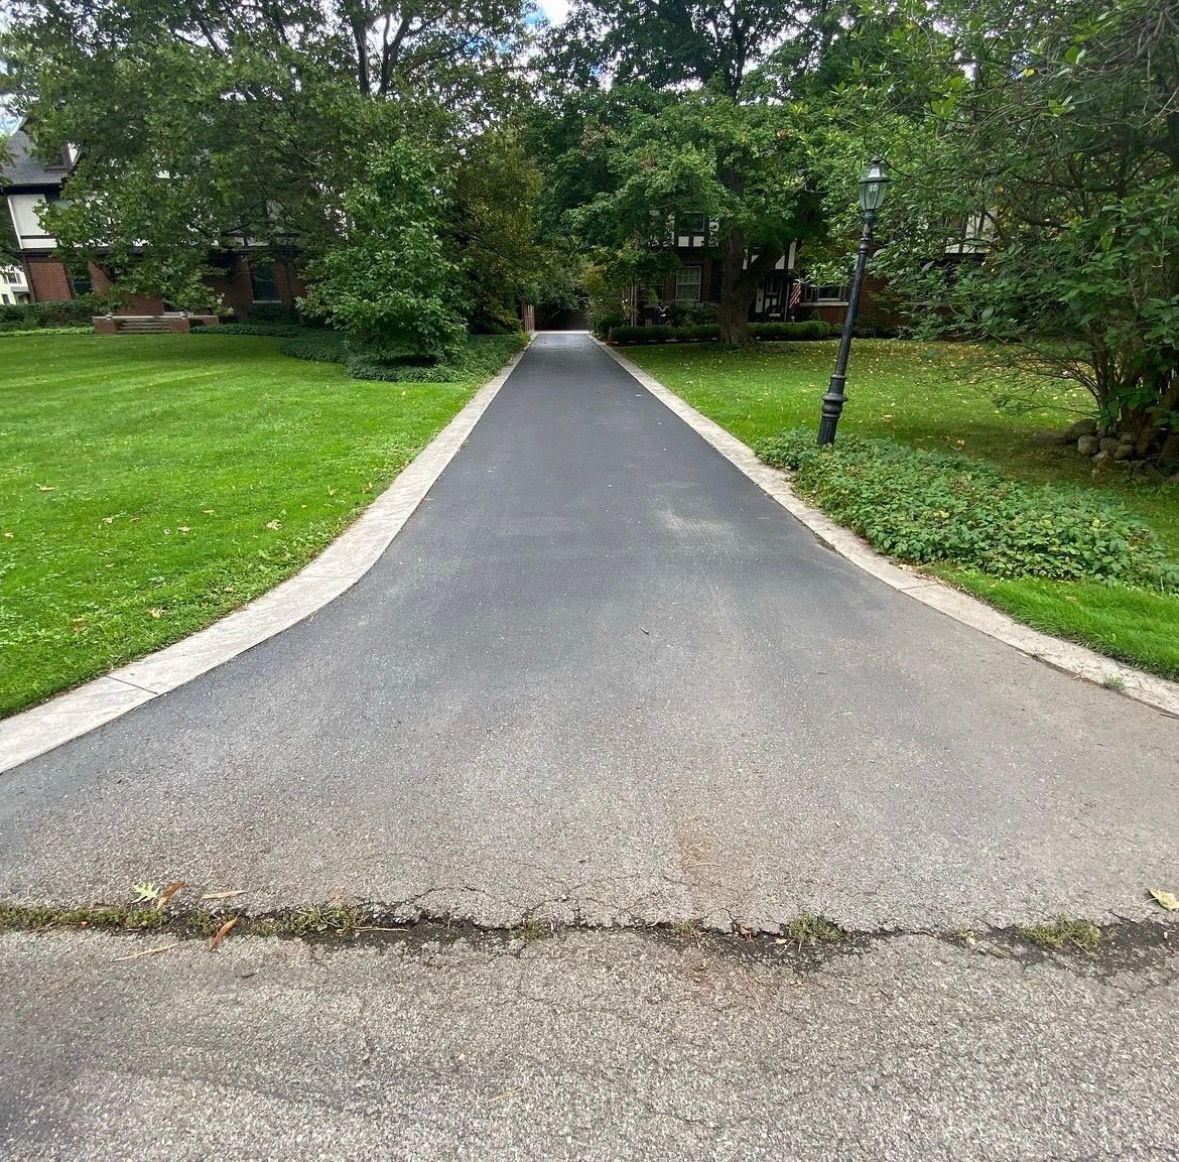 a driveway leading to a house surrounded by trees and grass